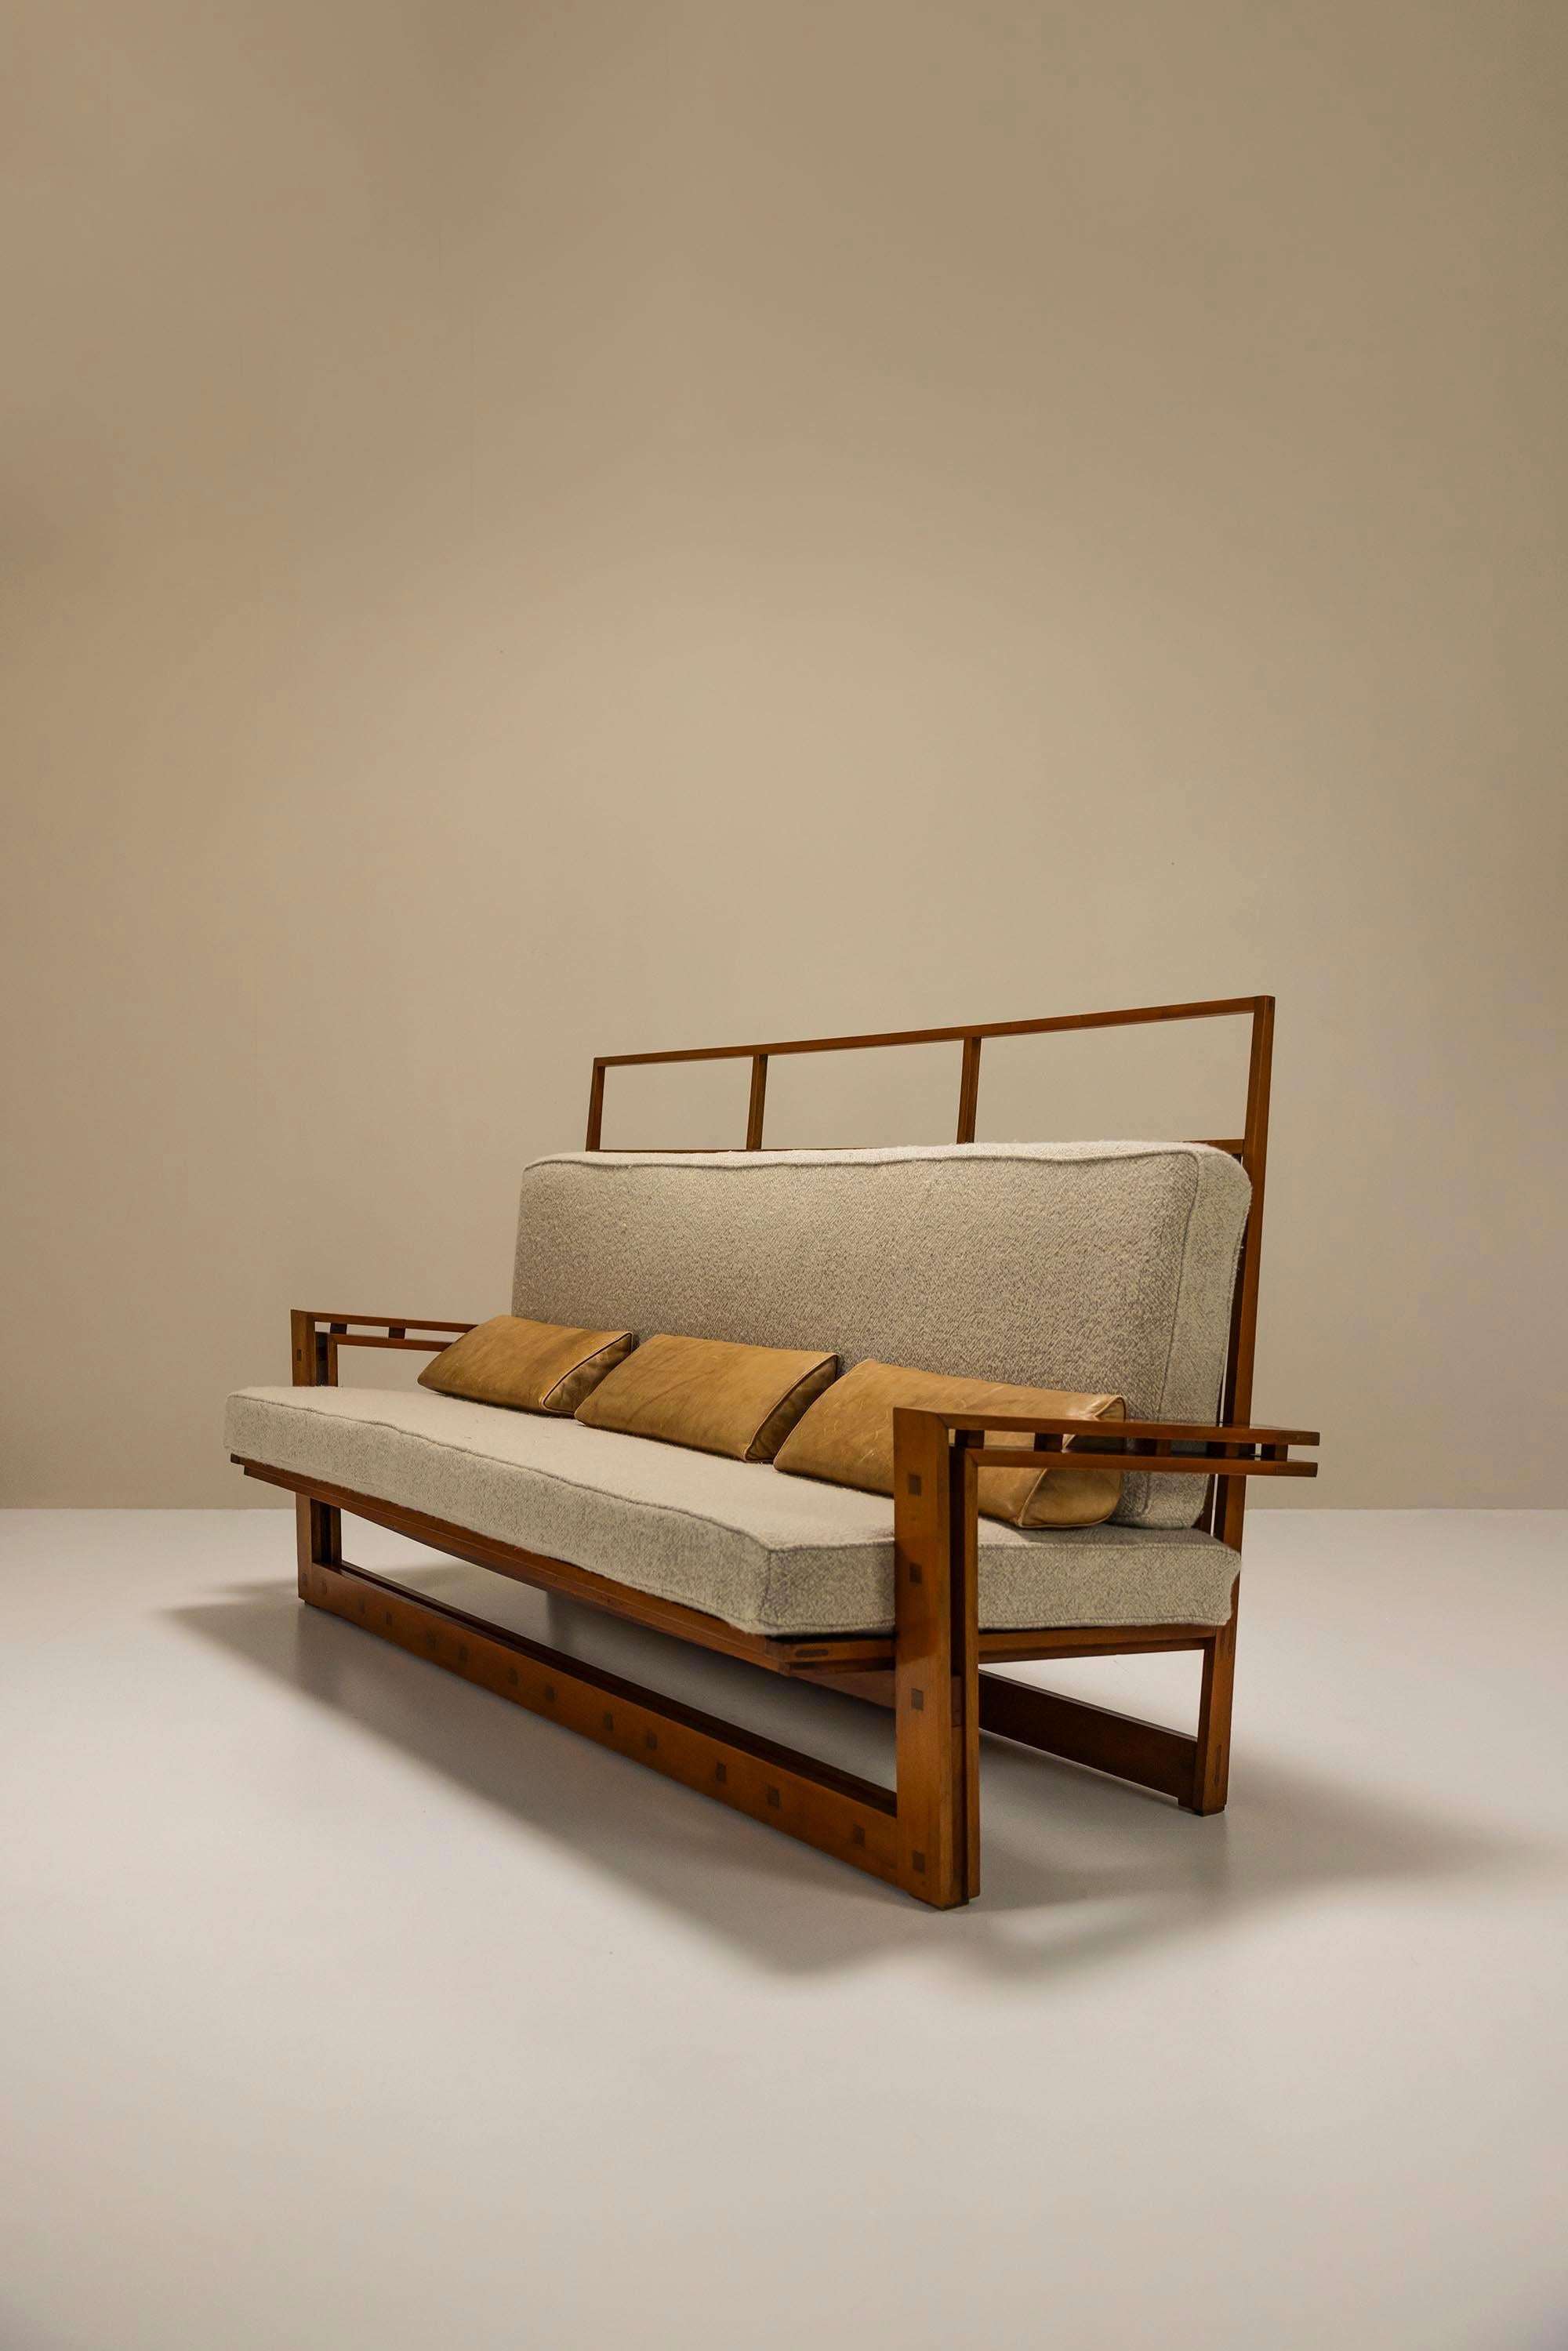 Italian Three Seater Sofa In Solid Ash And Mansonia Wood By Fausto Bontempi, Italy 1961 For Sale